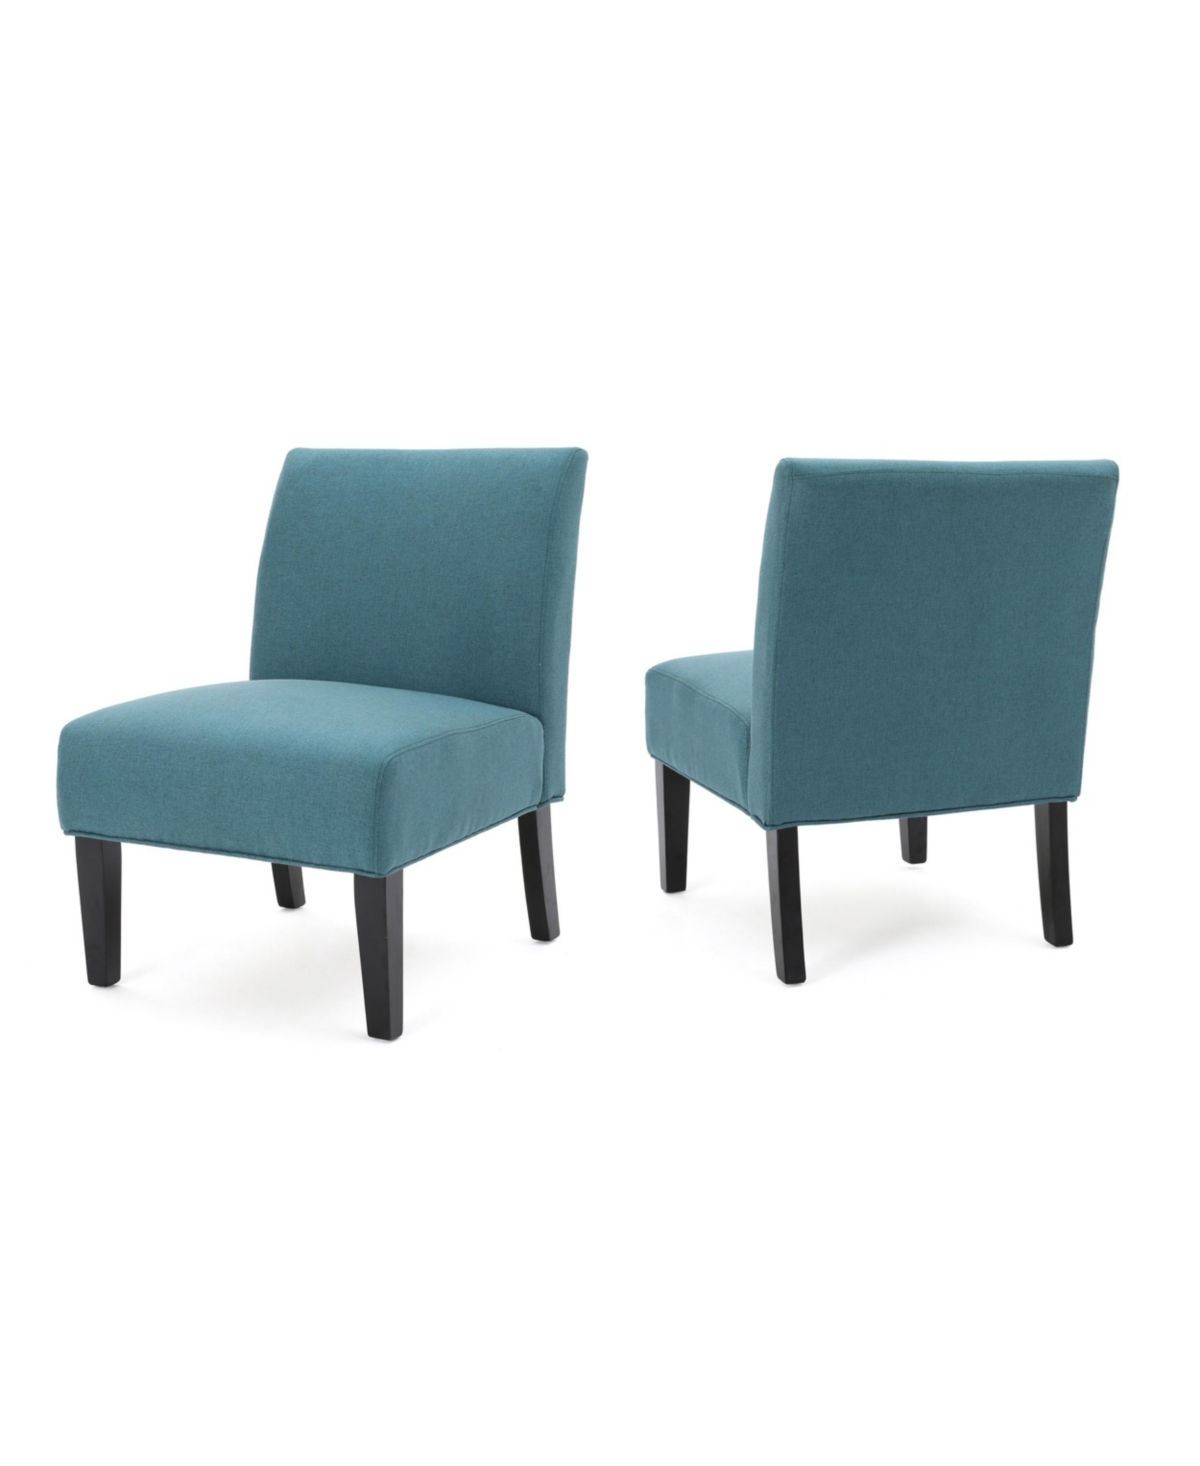 Noble House Kassi Accent Chair Set, 2 Piece In Dark Teal